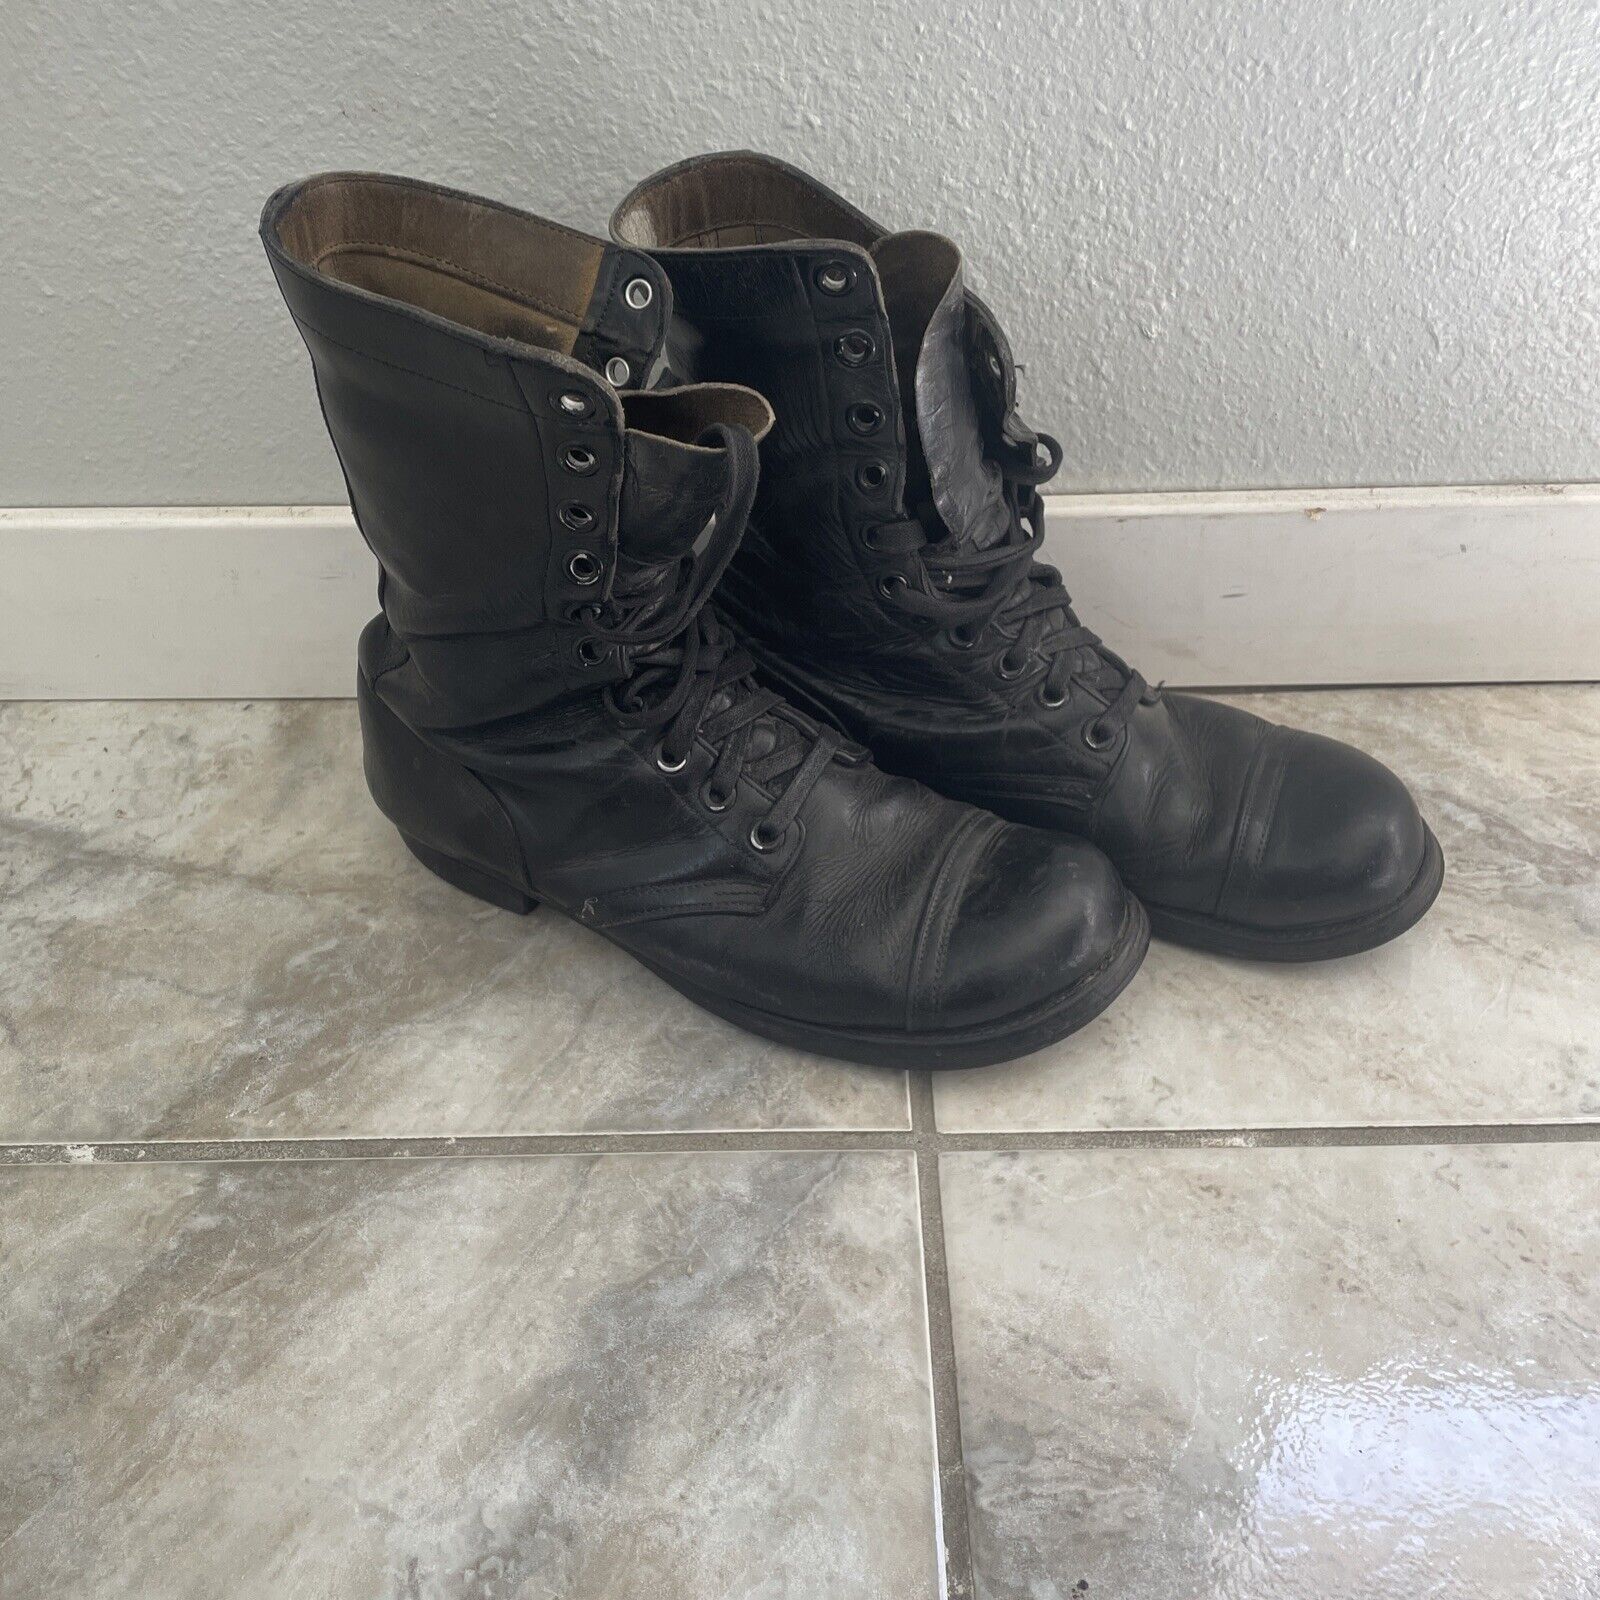 Vintage Military Herman Leather Boots 1940s / 1950s ? I’d WW2 Army Boots